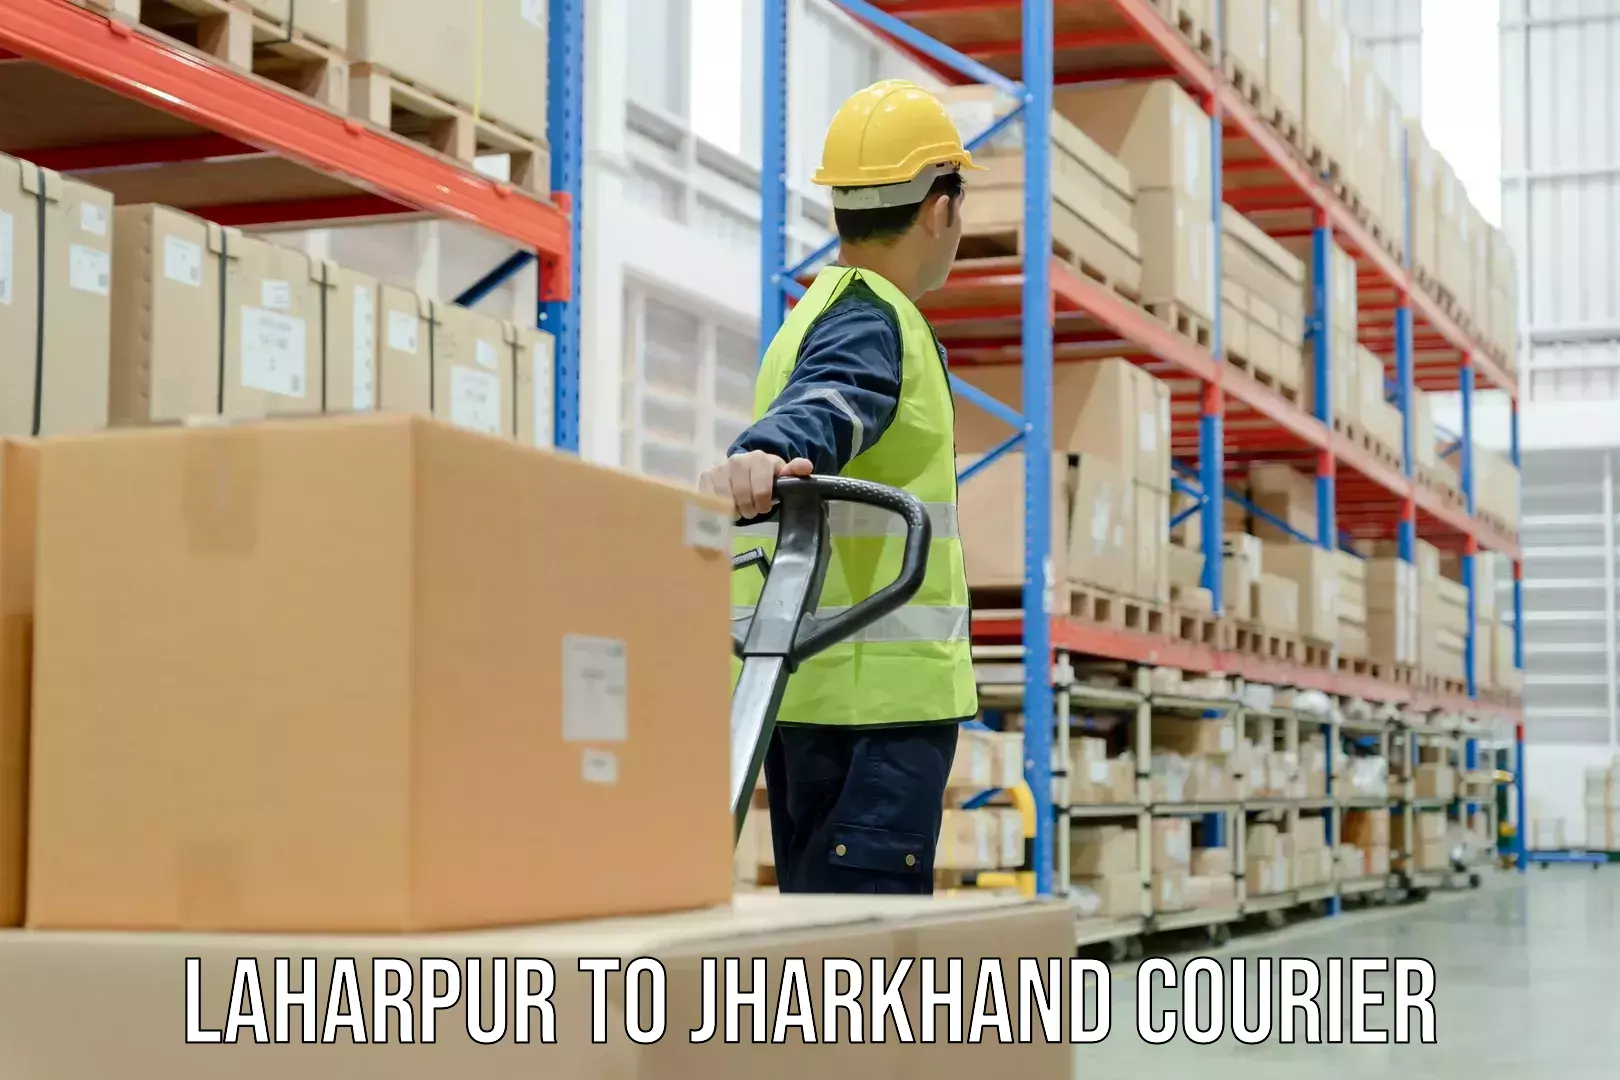 User-friendly delivery service Laharpur to Padma Hazaribagh